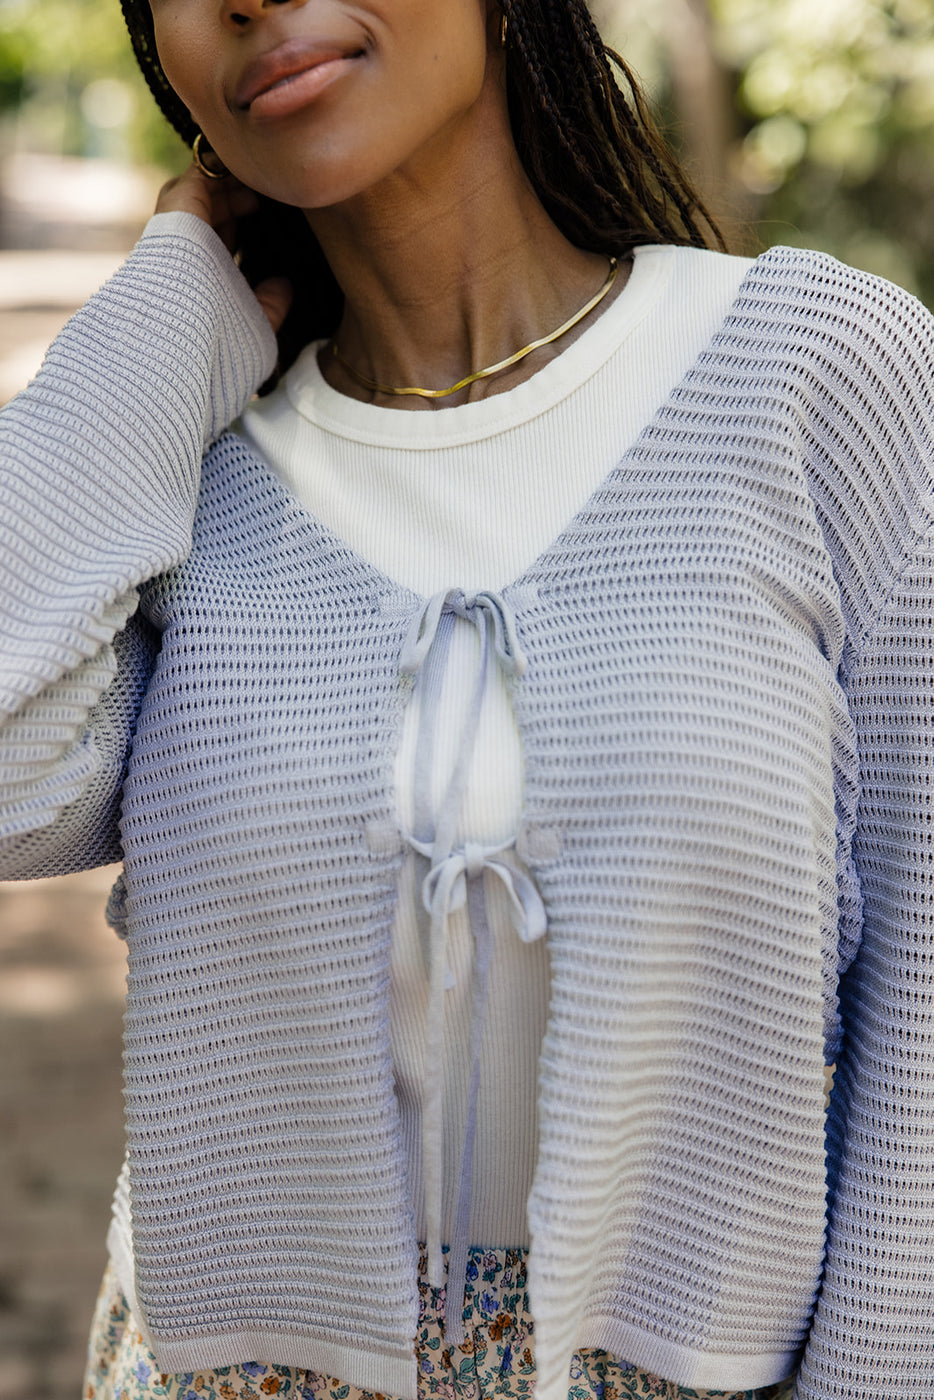 a woman wearing a white shirt and a blue sweater